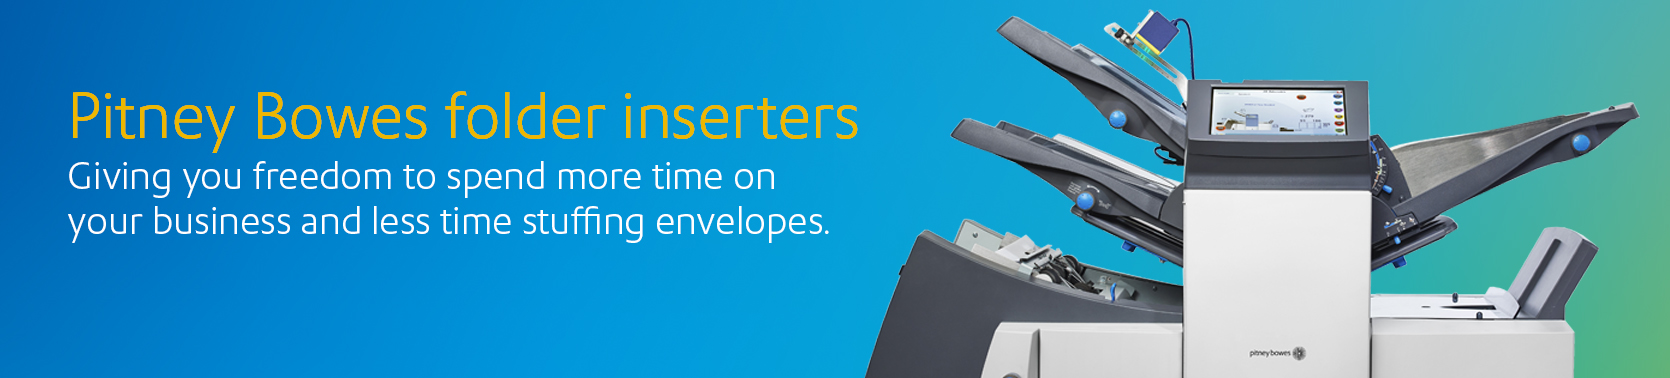 Pitney Bowes Folders Inserters. Giving you the freedom to spend more time on your business and less time stuffing envelopes.